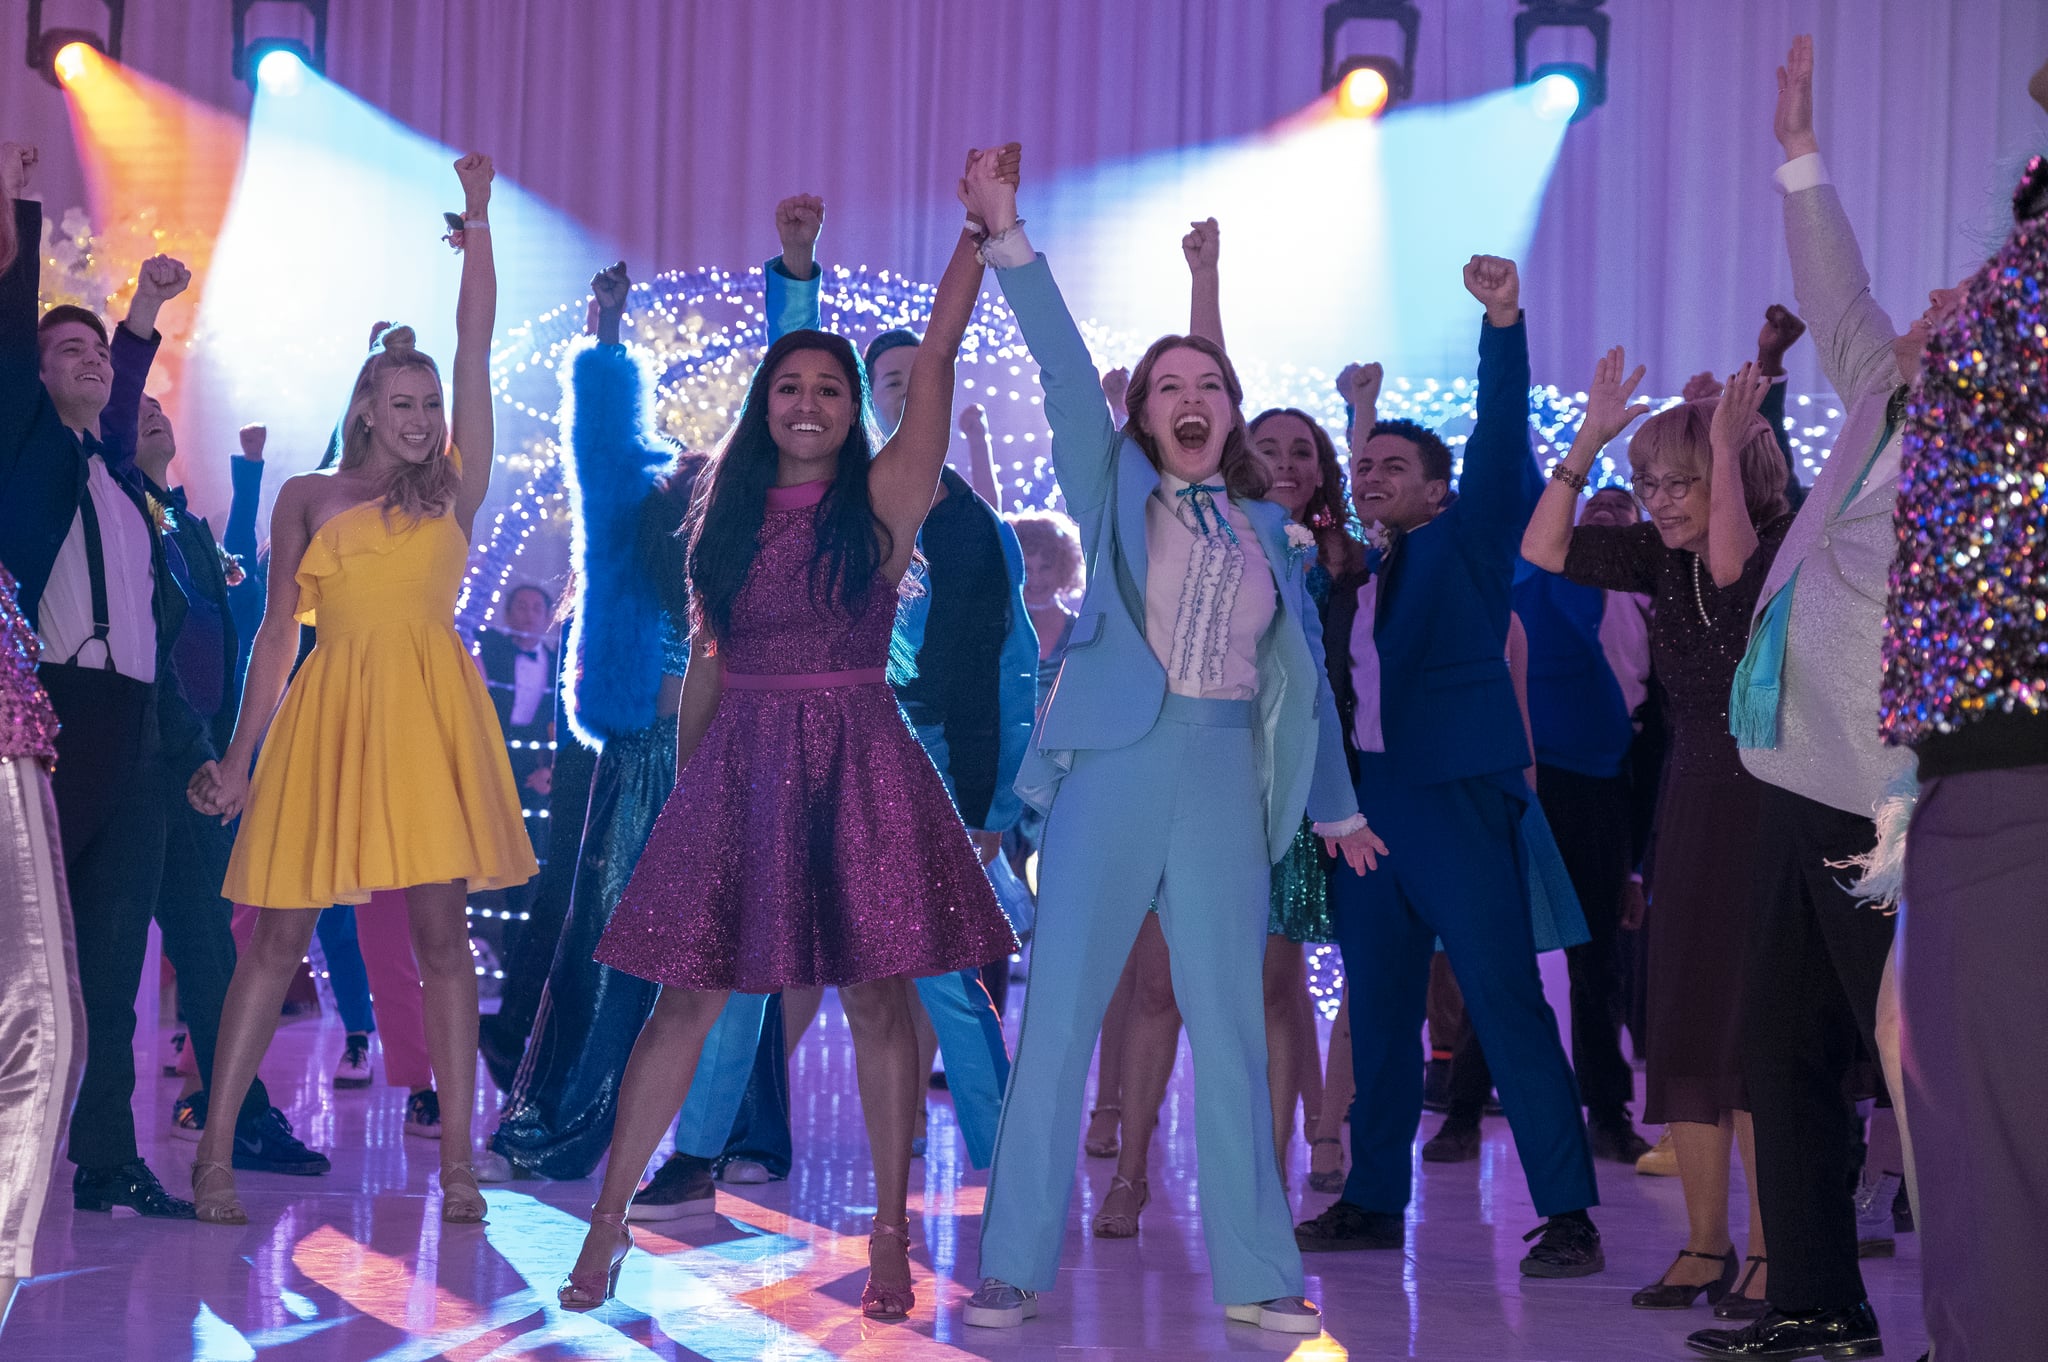 THE PROM (L to R)  NICO GREETHAM as NICK, LOGAN RILEY HASSEL as KAYLEE, ARIANA DEBOSE as ALYSSA GREENE, ANDREW RANNELLS as TRENT OLIVER, JO ELLEN PELLMAN as EMMA, SOFIA DELER as SHELBY, NATHANIEL POTVIN as KEVIN, TRACEY ULLMAN as VERA, JAMES CORDEN as BARRY GLICKMAN in THE PROM. Cr. MELINDA SUE GORDON/NETFLIX  2020